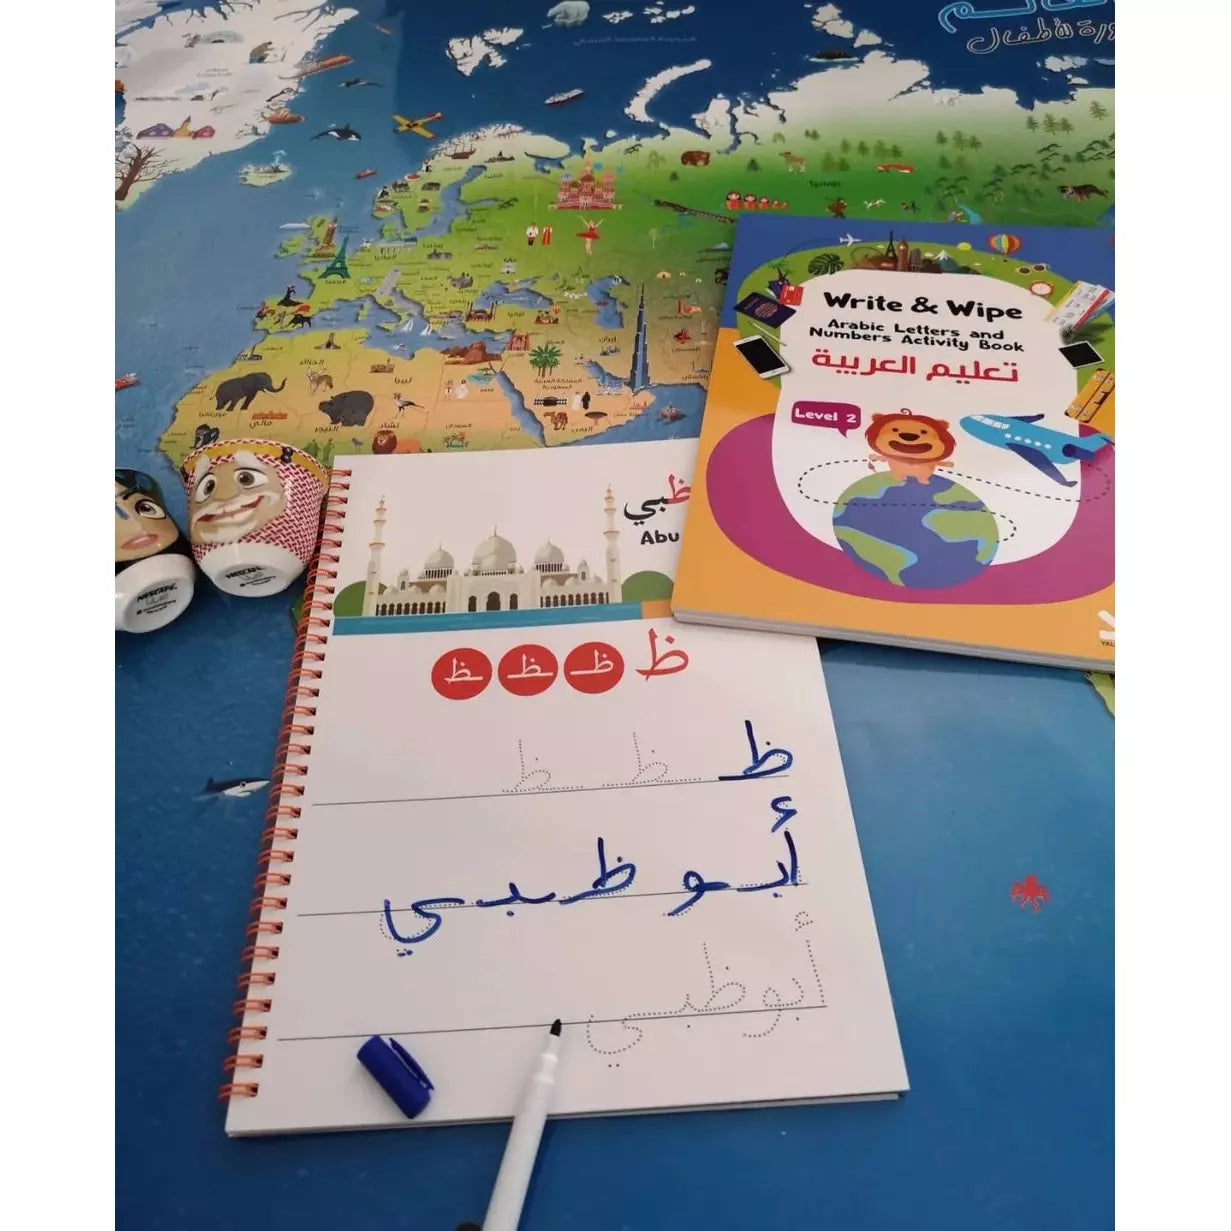 Write & Wipe Arabic Letters & Numbers Book (Travel Theme)